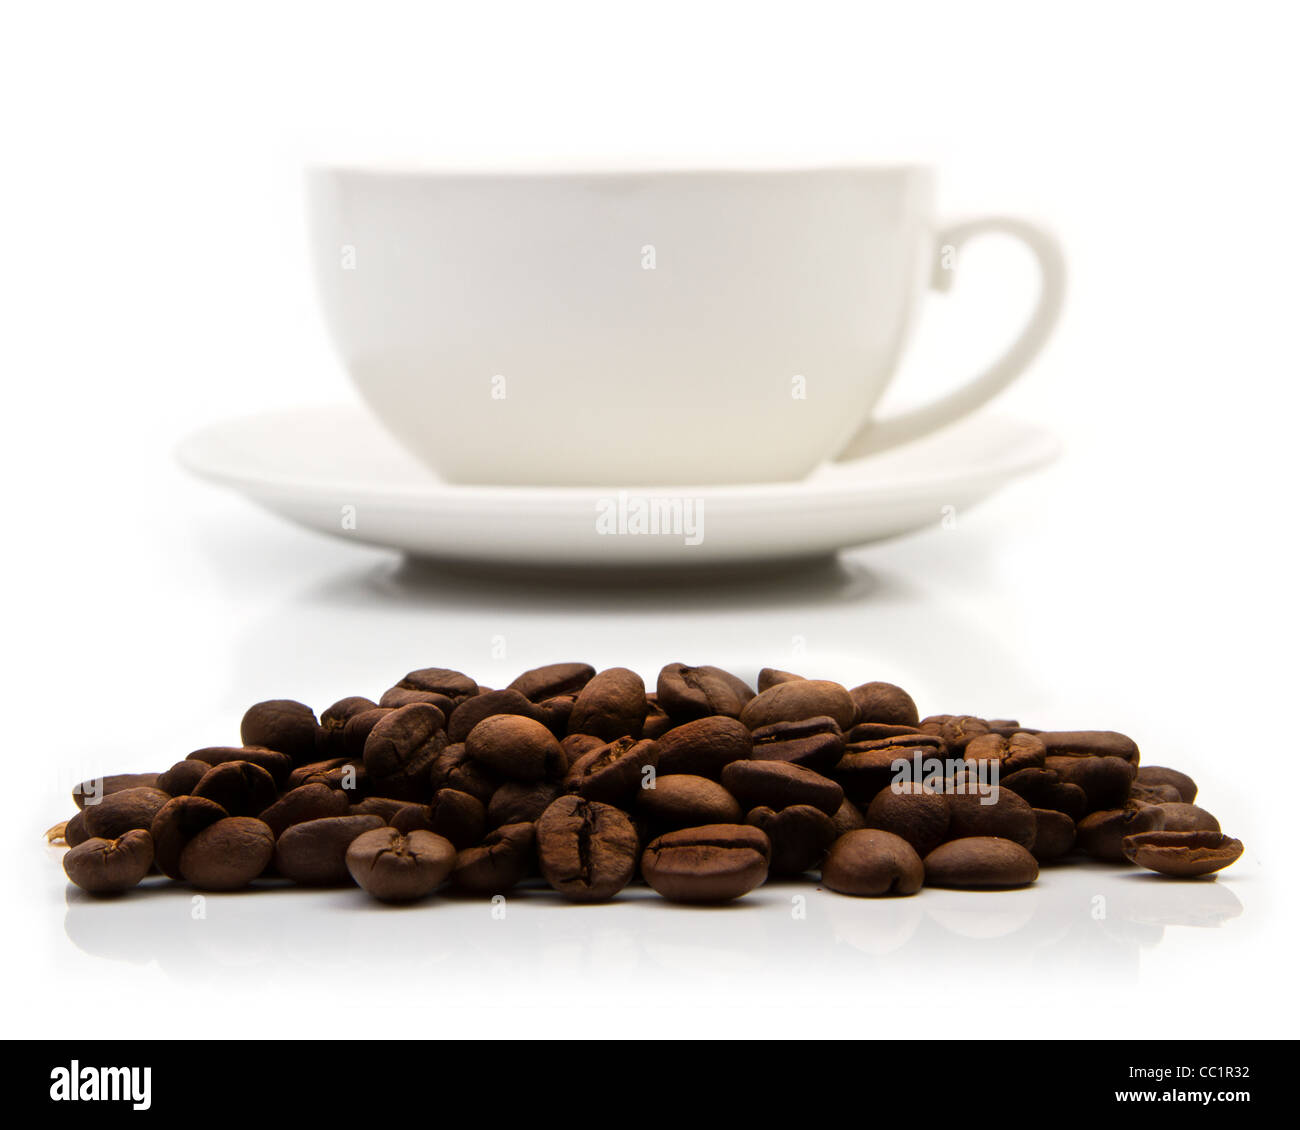 Coffee cup on white background Stock Photo